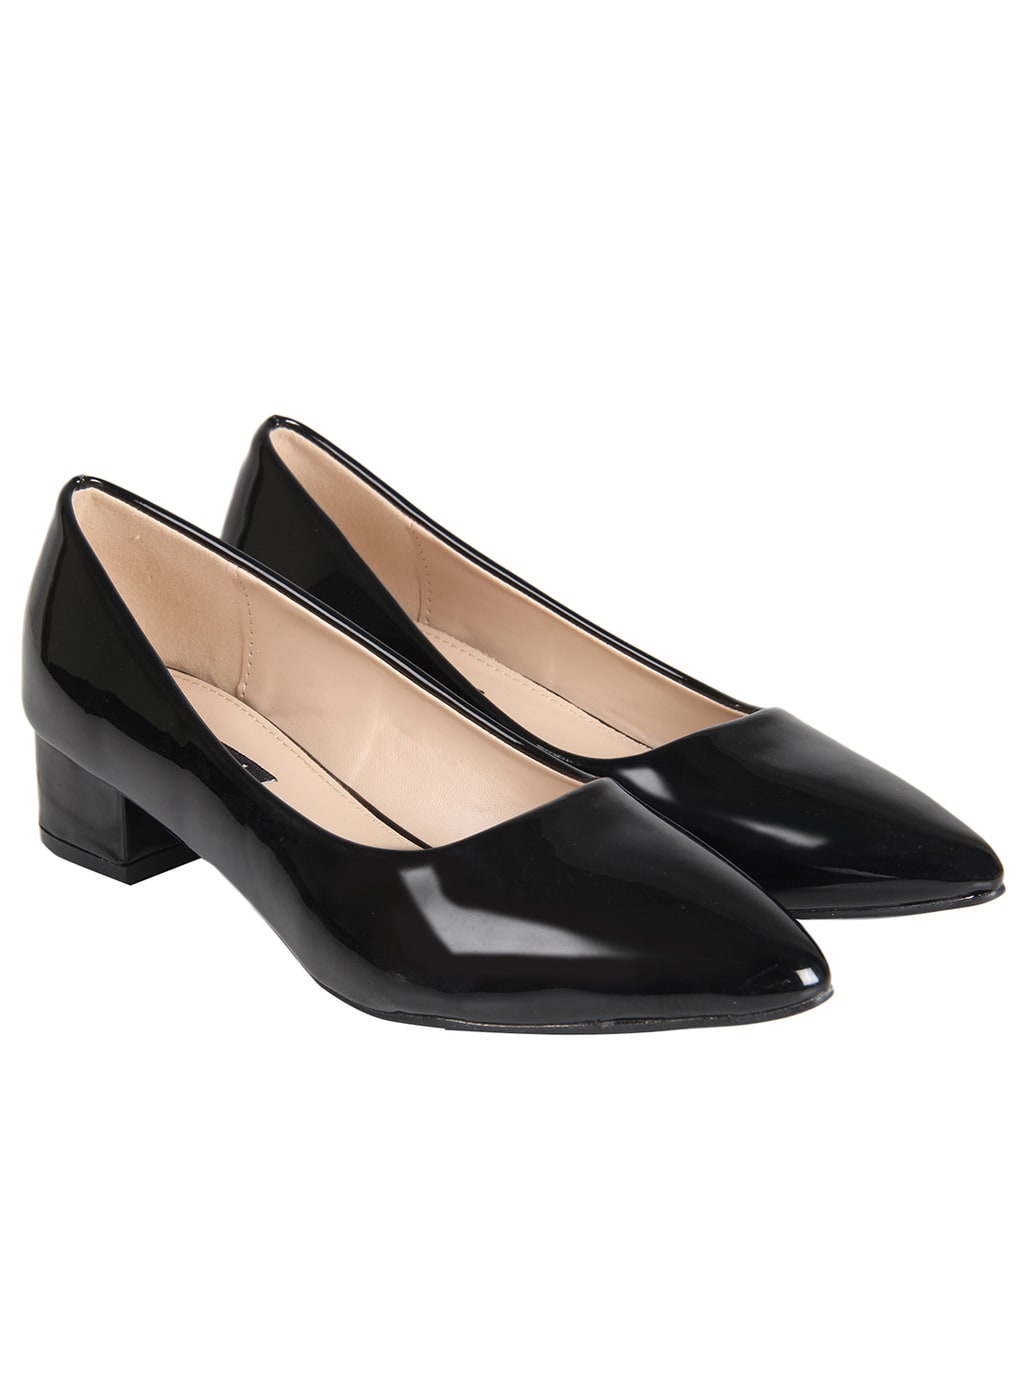 Black Heeled Shoes for Women by Flat 